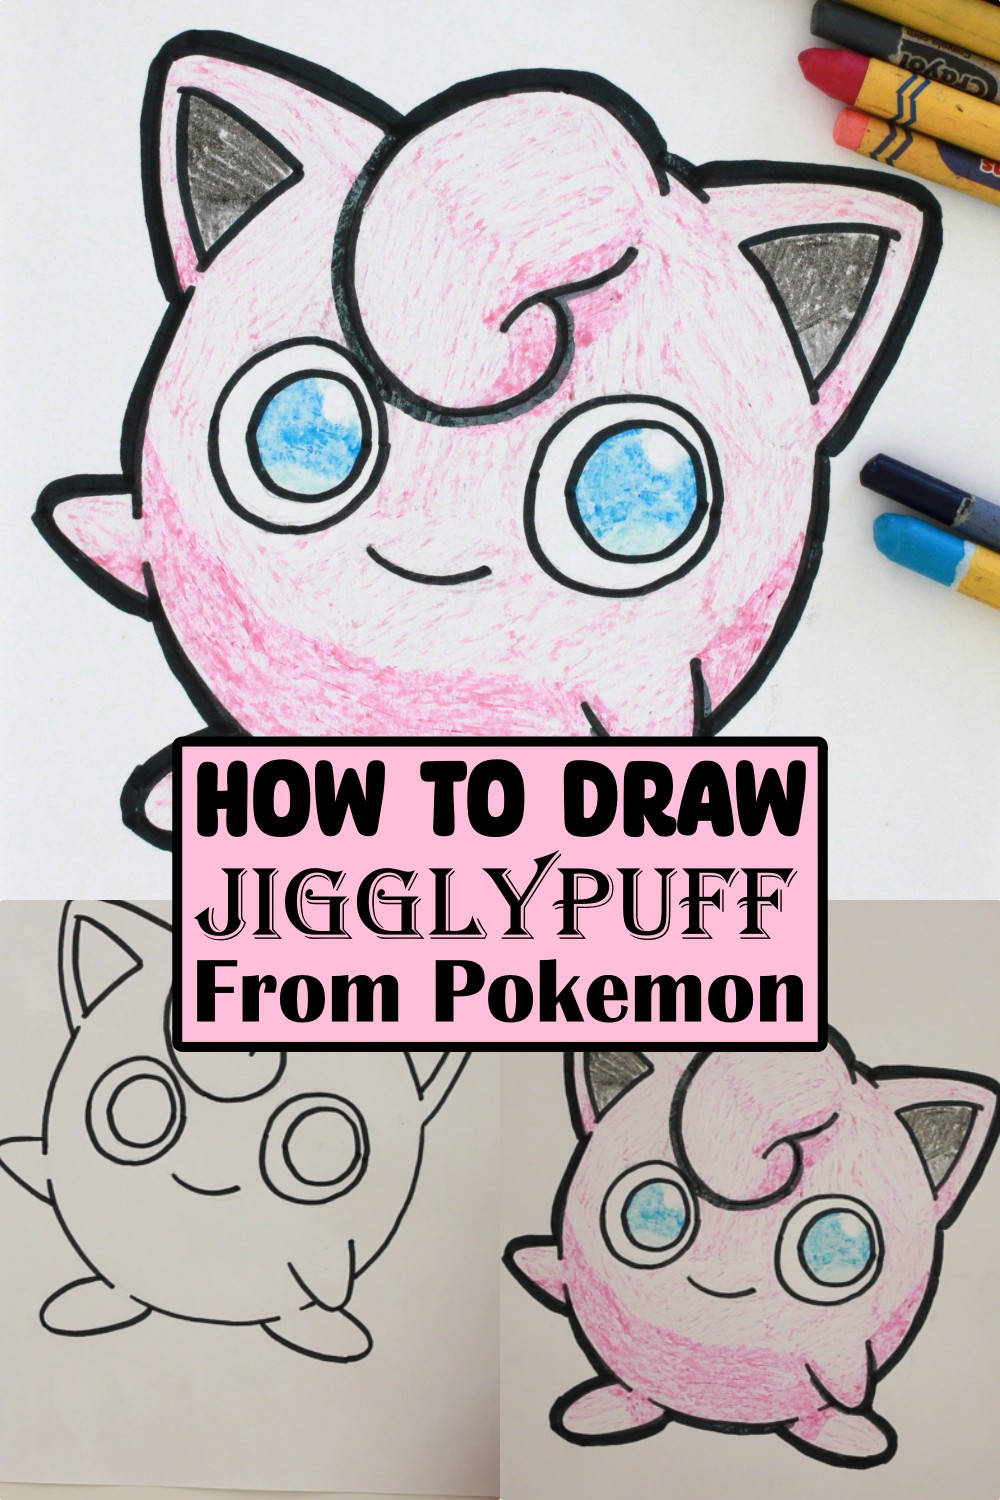 How To Draw Jigglypuff From Pokemon